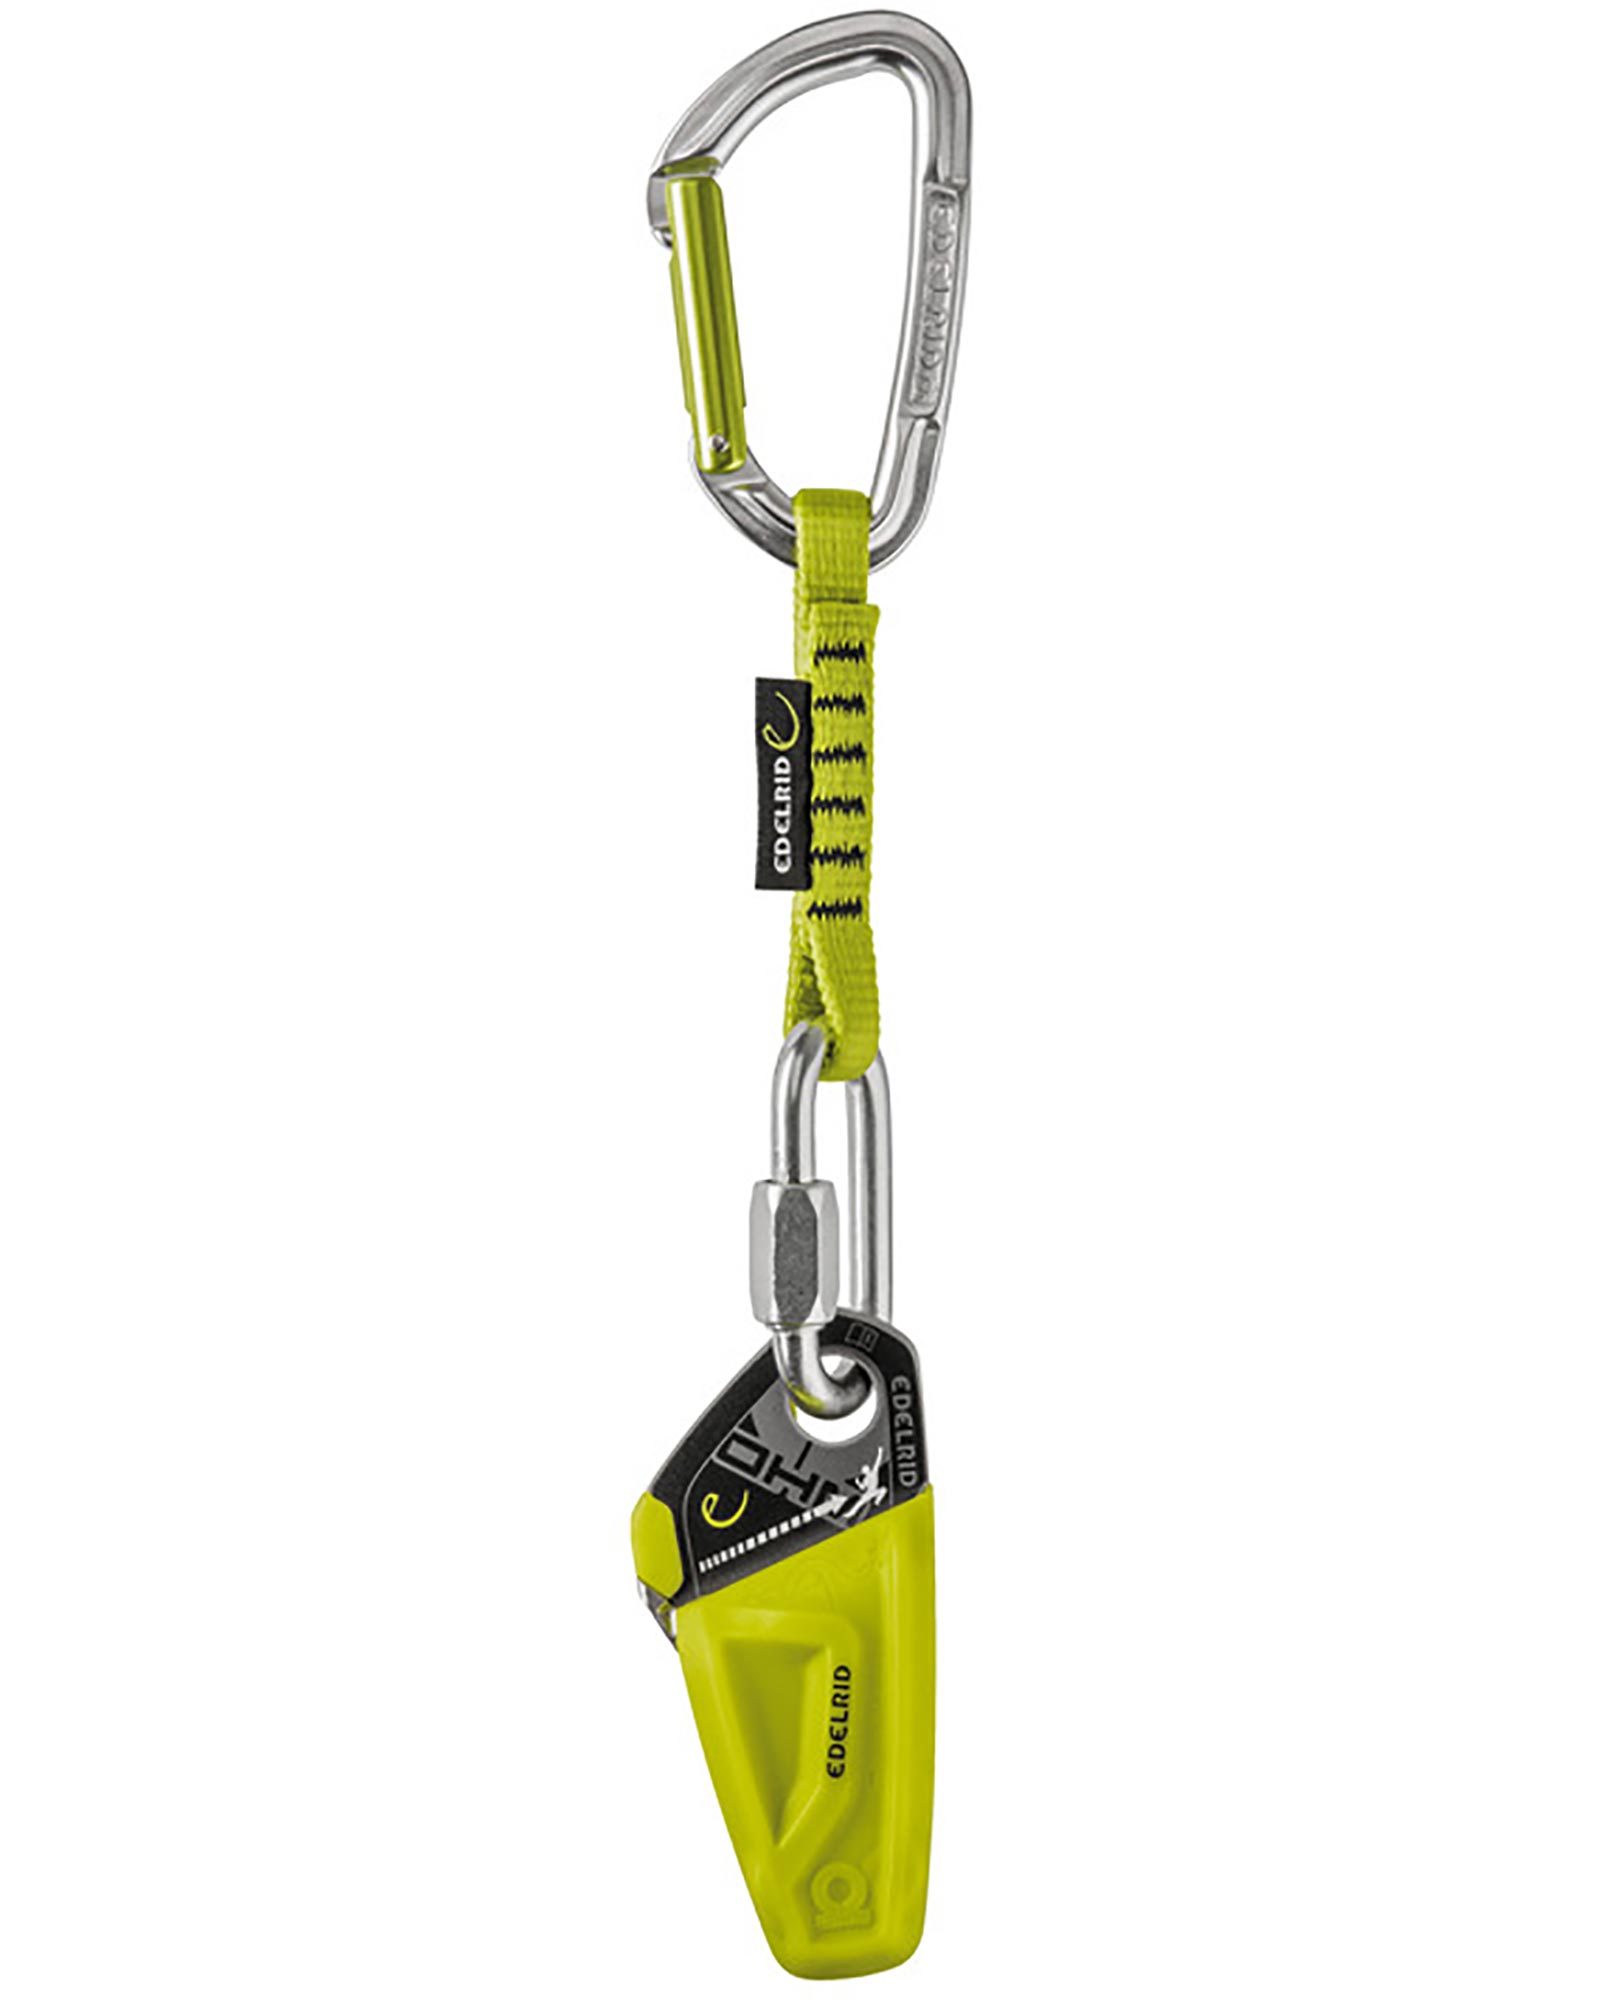 Edelrid Ohm Assisted Braking Device